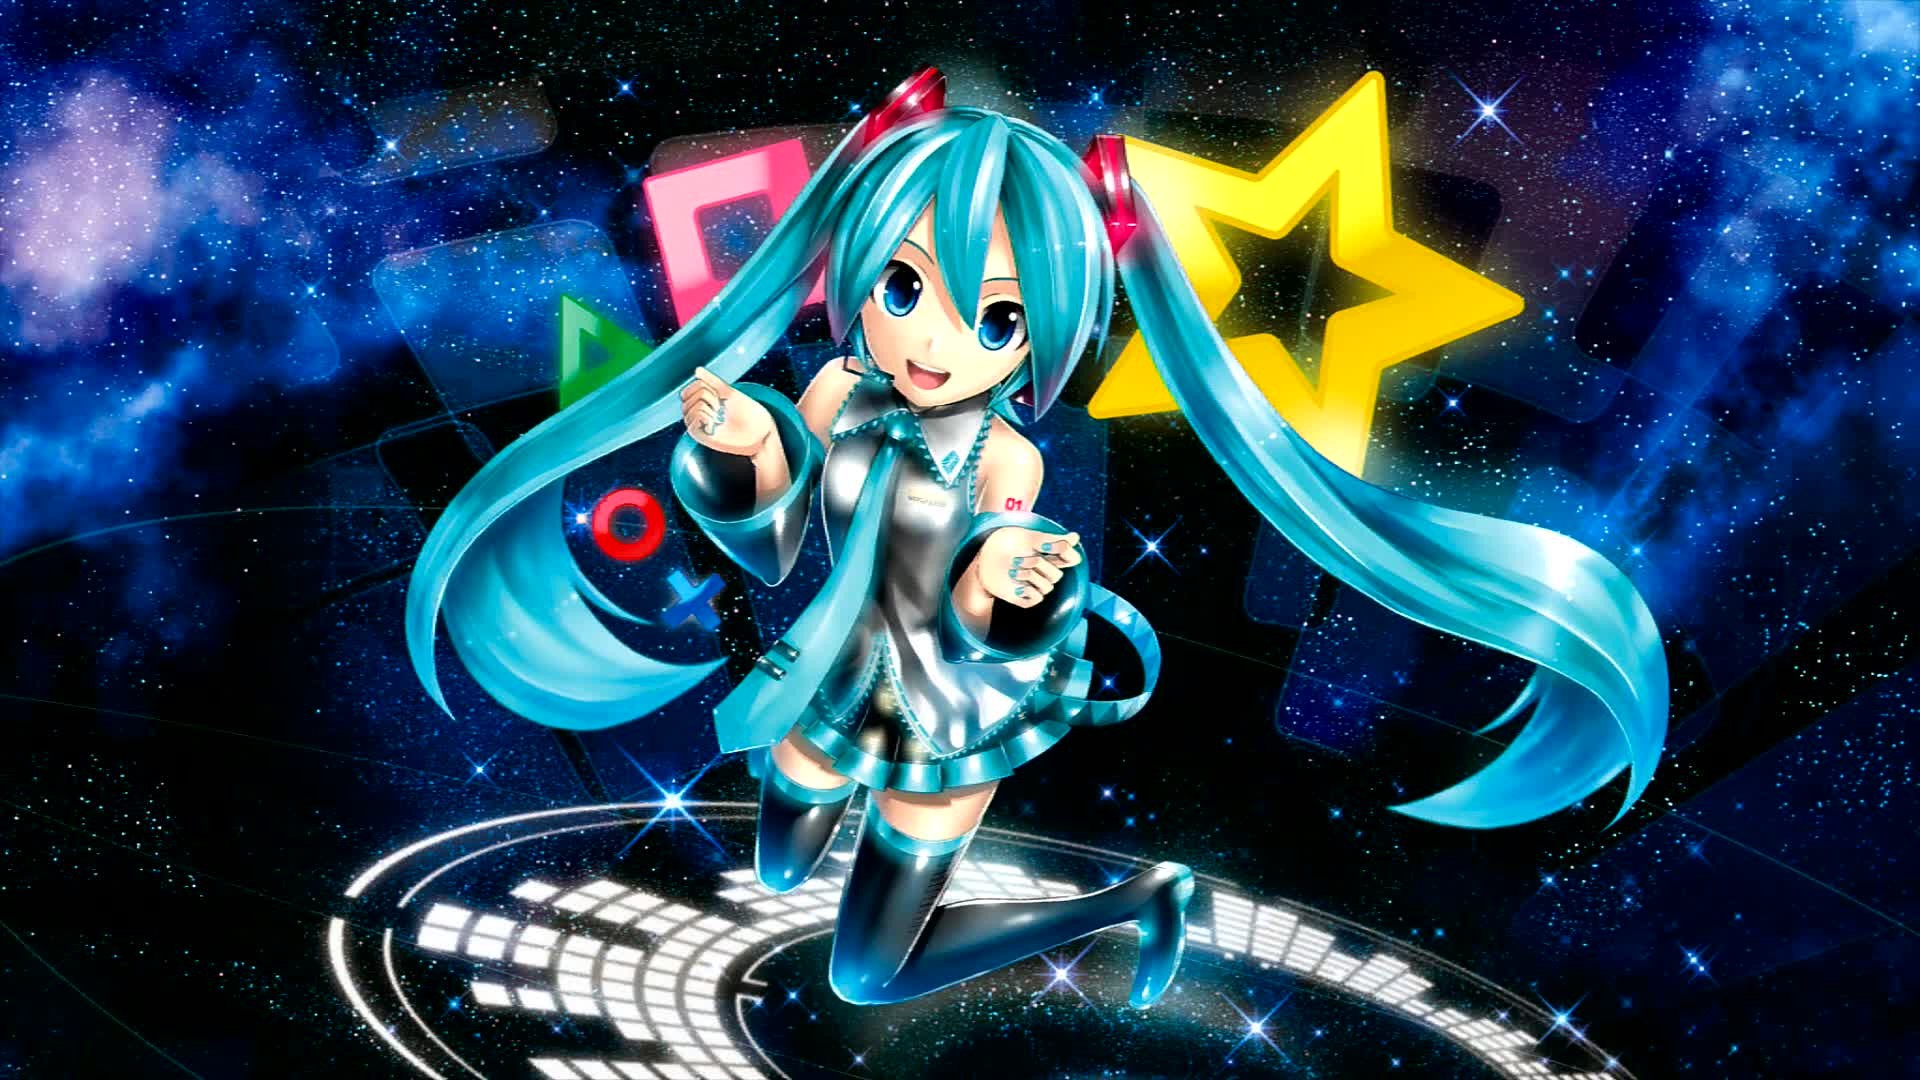 1920x1080 Cool Vocaloid Wallpapers | wallpapers | Pinterest Vocaloid Wallpaper (25  Wallpapers) – Adorable Wallpapers ...